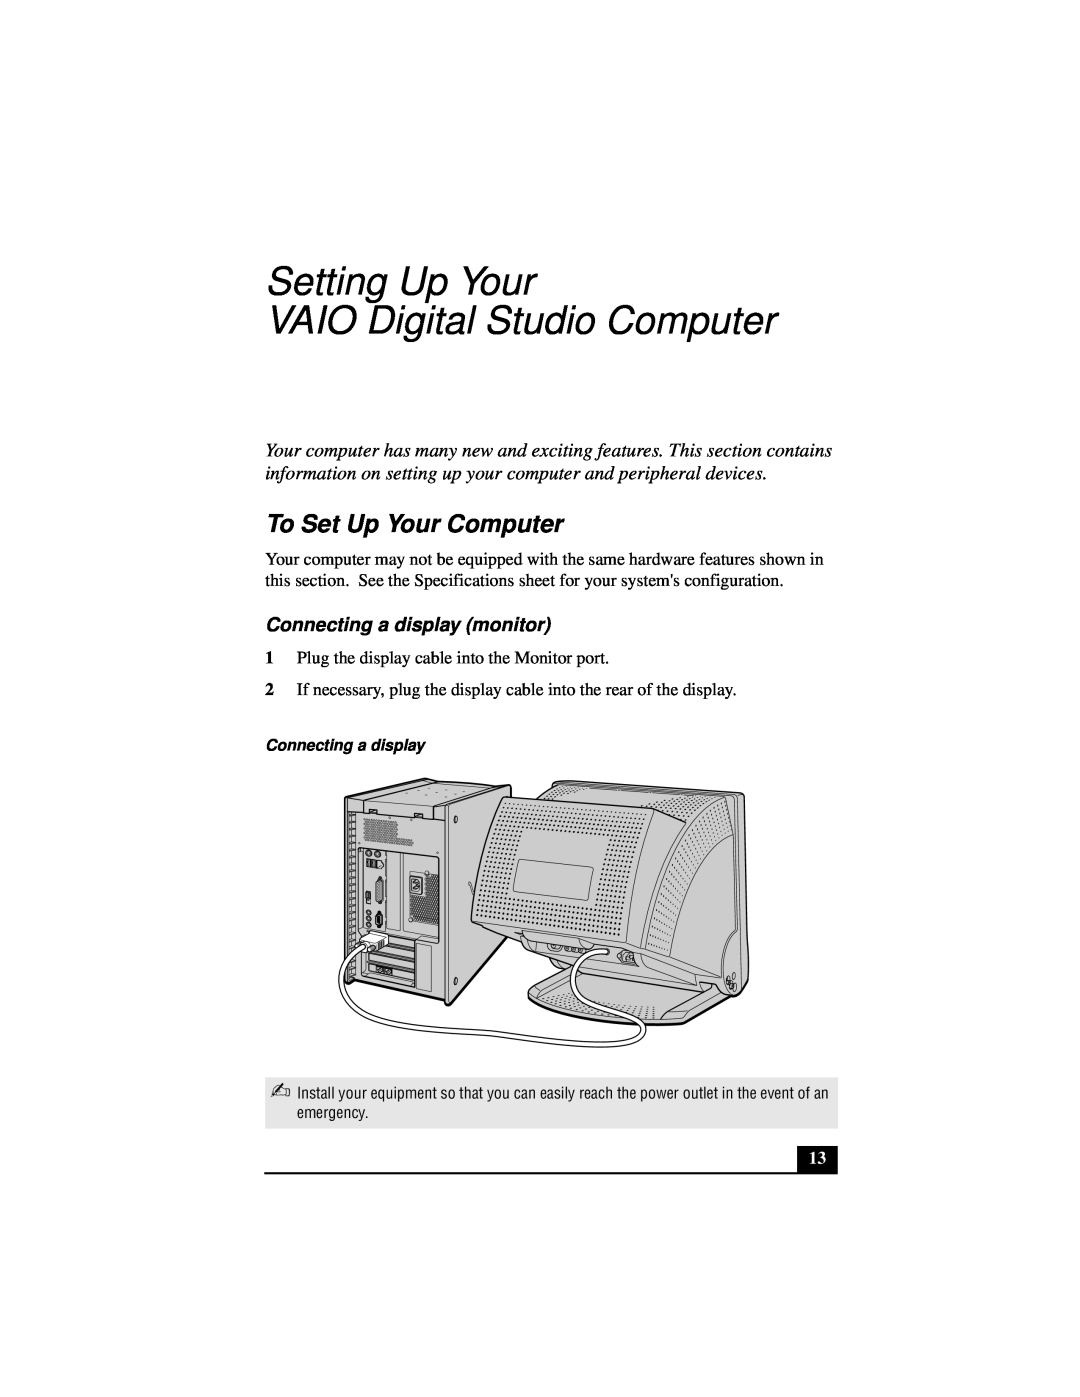 Sony Countertop Computer quick start Setting Up Your VAIO Digital Studio Computer, To Set Up Your Computer 